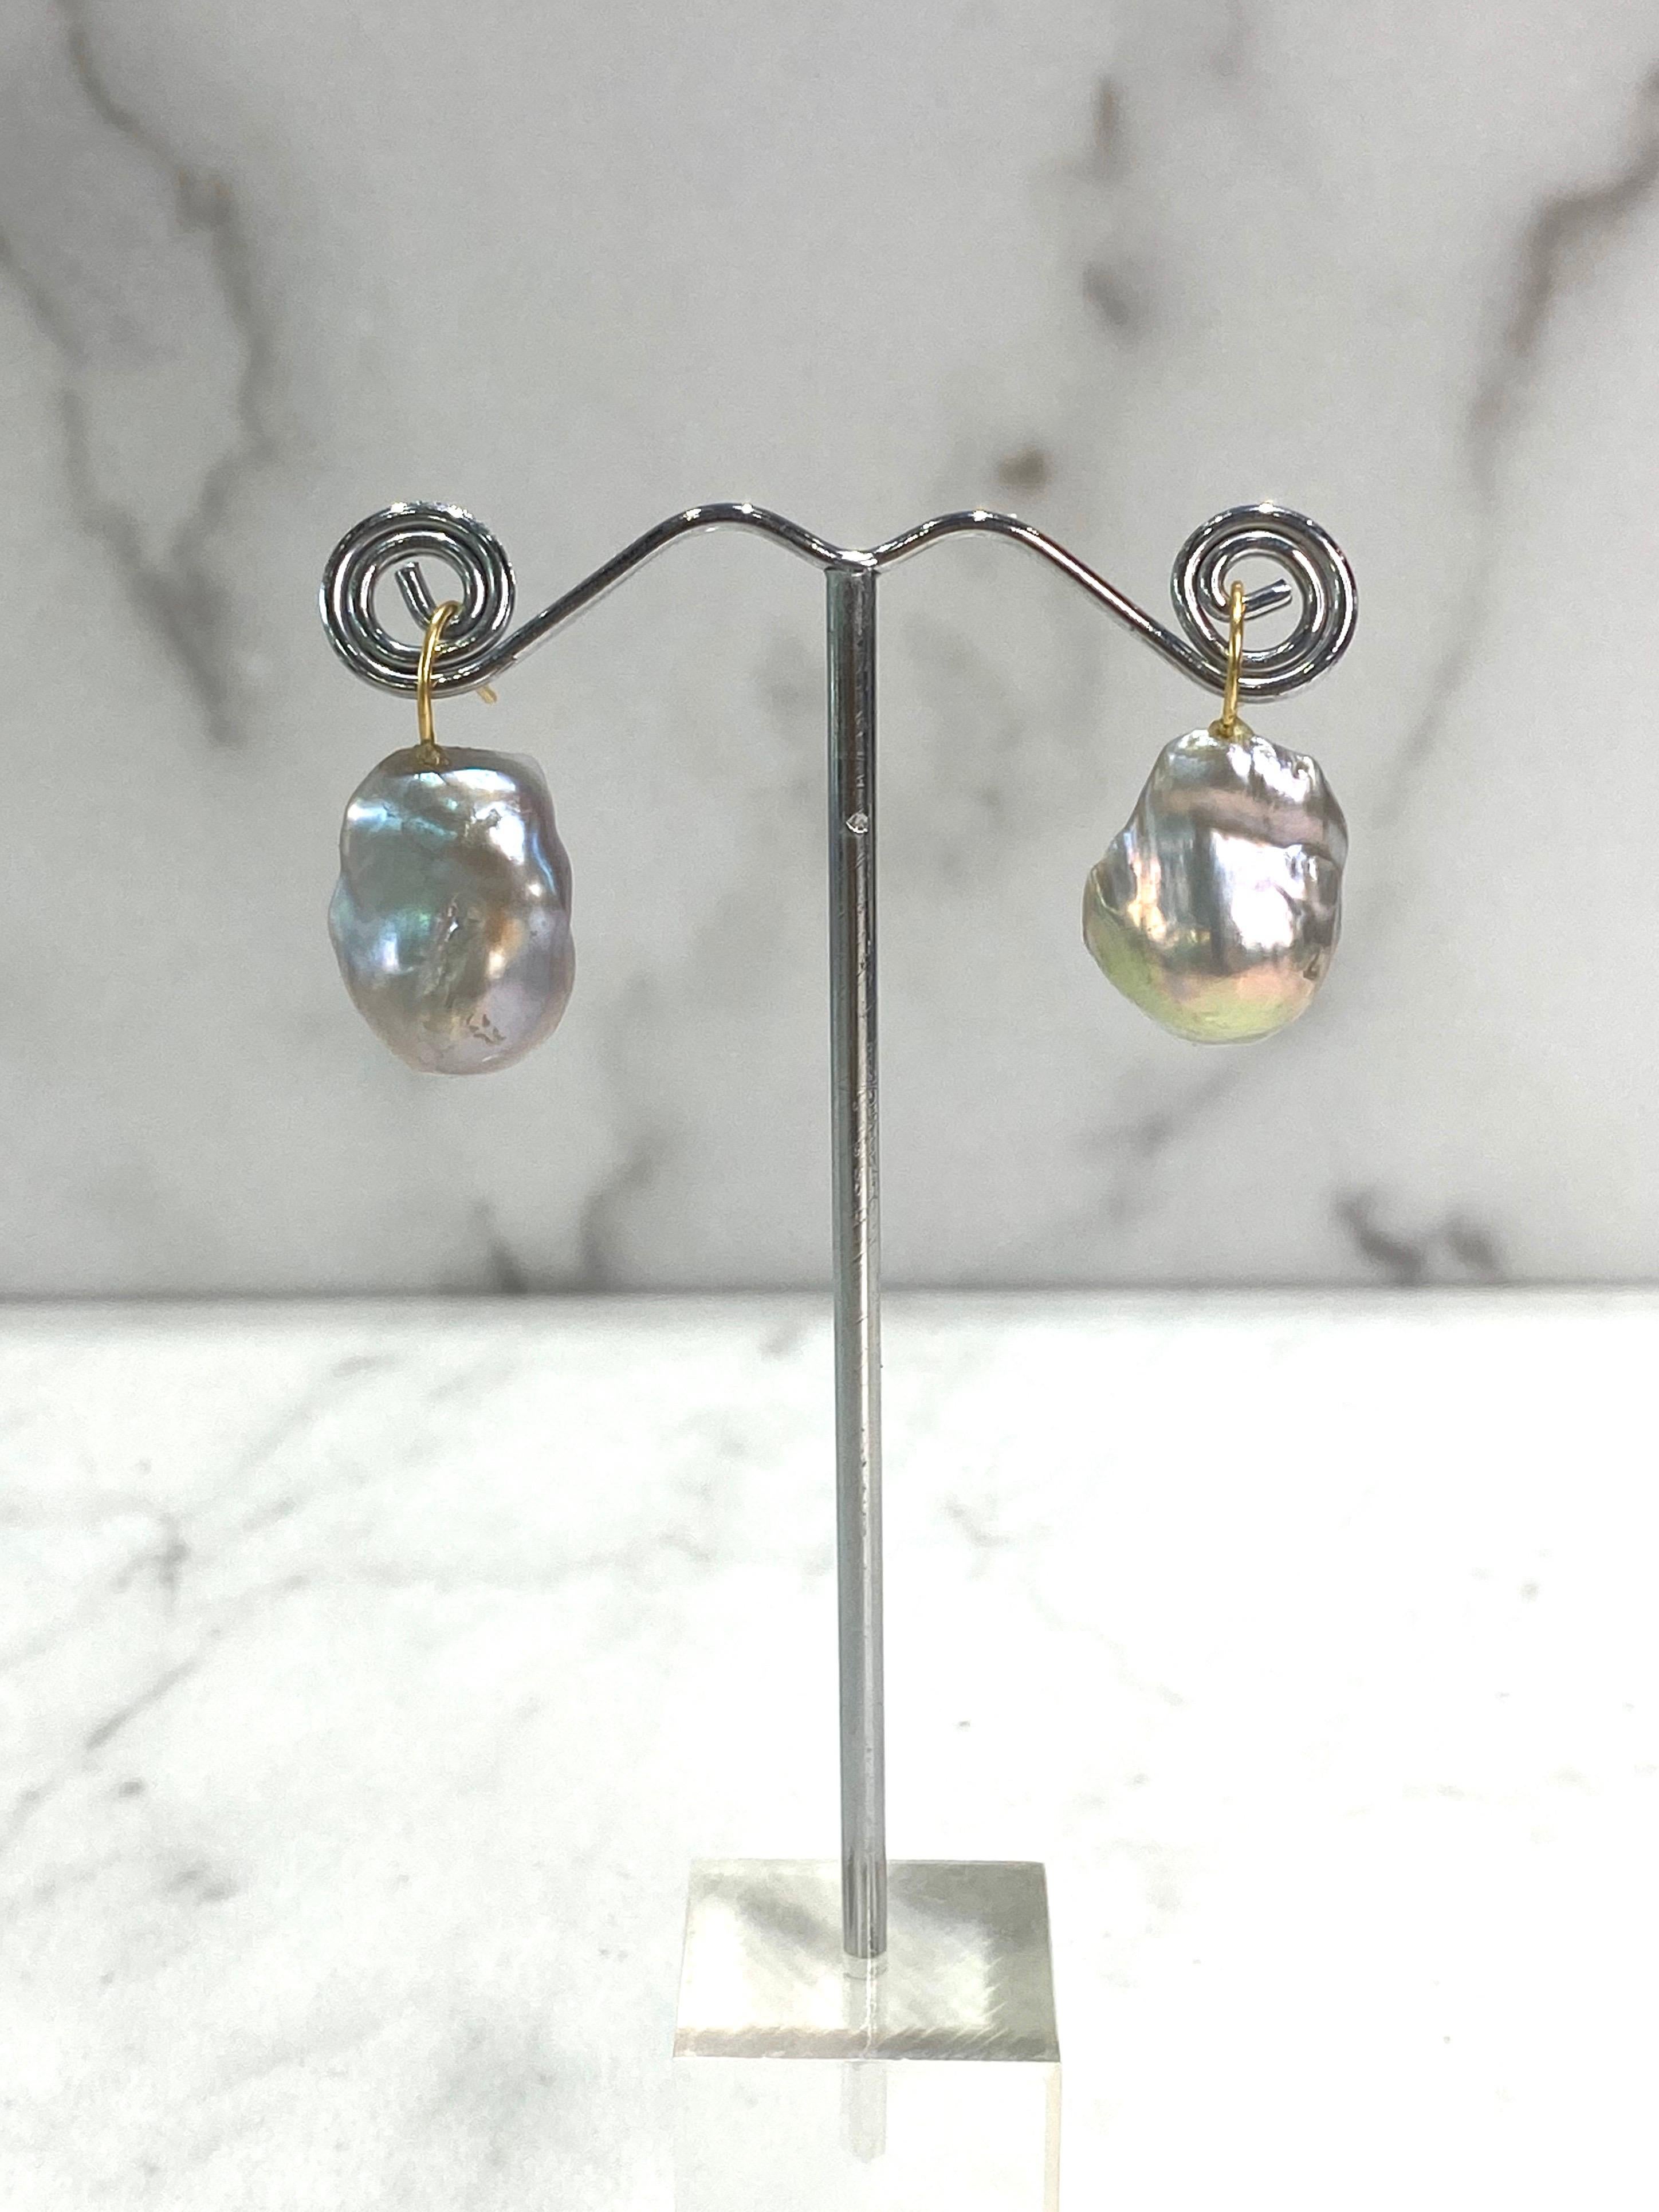 These earrings should be a staple to any wardrobe - simple, elegant yet big enough to make a statement. They are made of a beautiful shade of platinum silver, naturally colored, baroque Edison pearls, mirror-like luster, with an 18k yellow gold